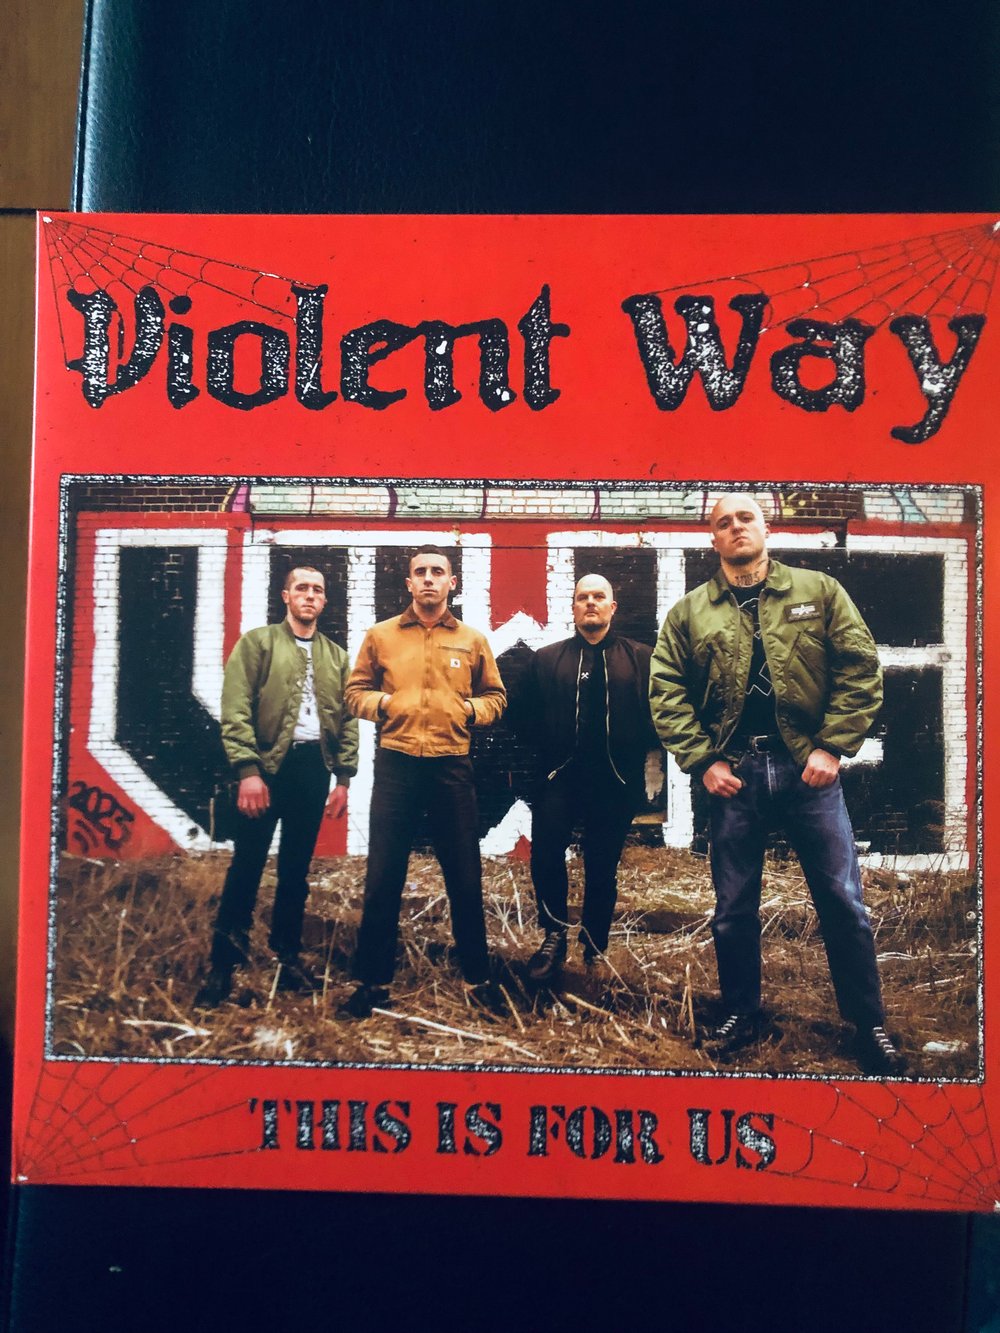 Violent Way - “This One’s For Us” 12" EP